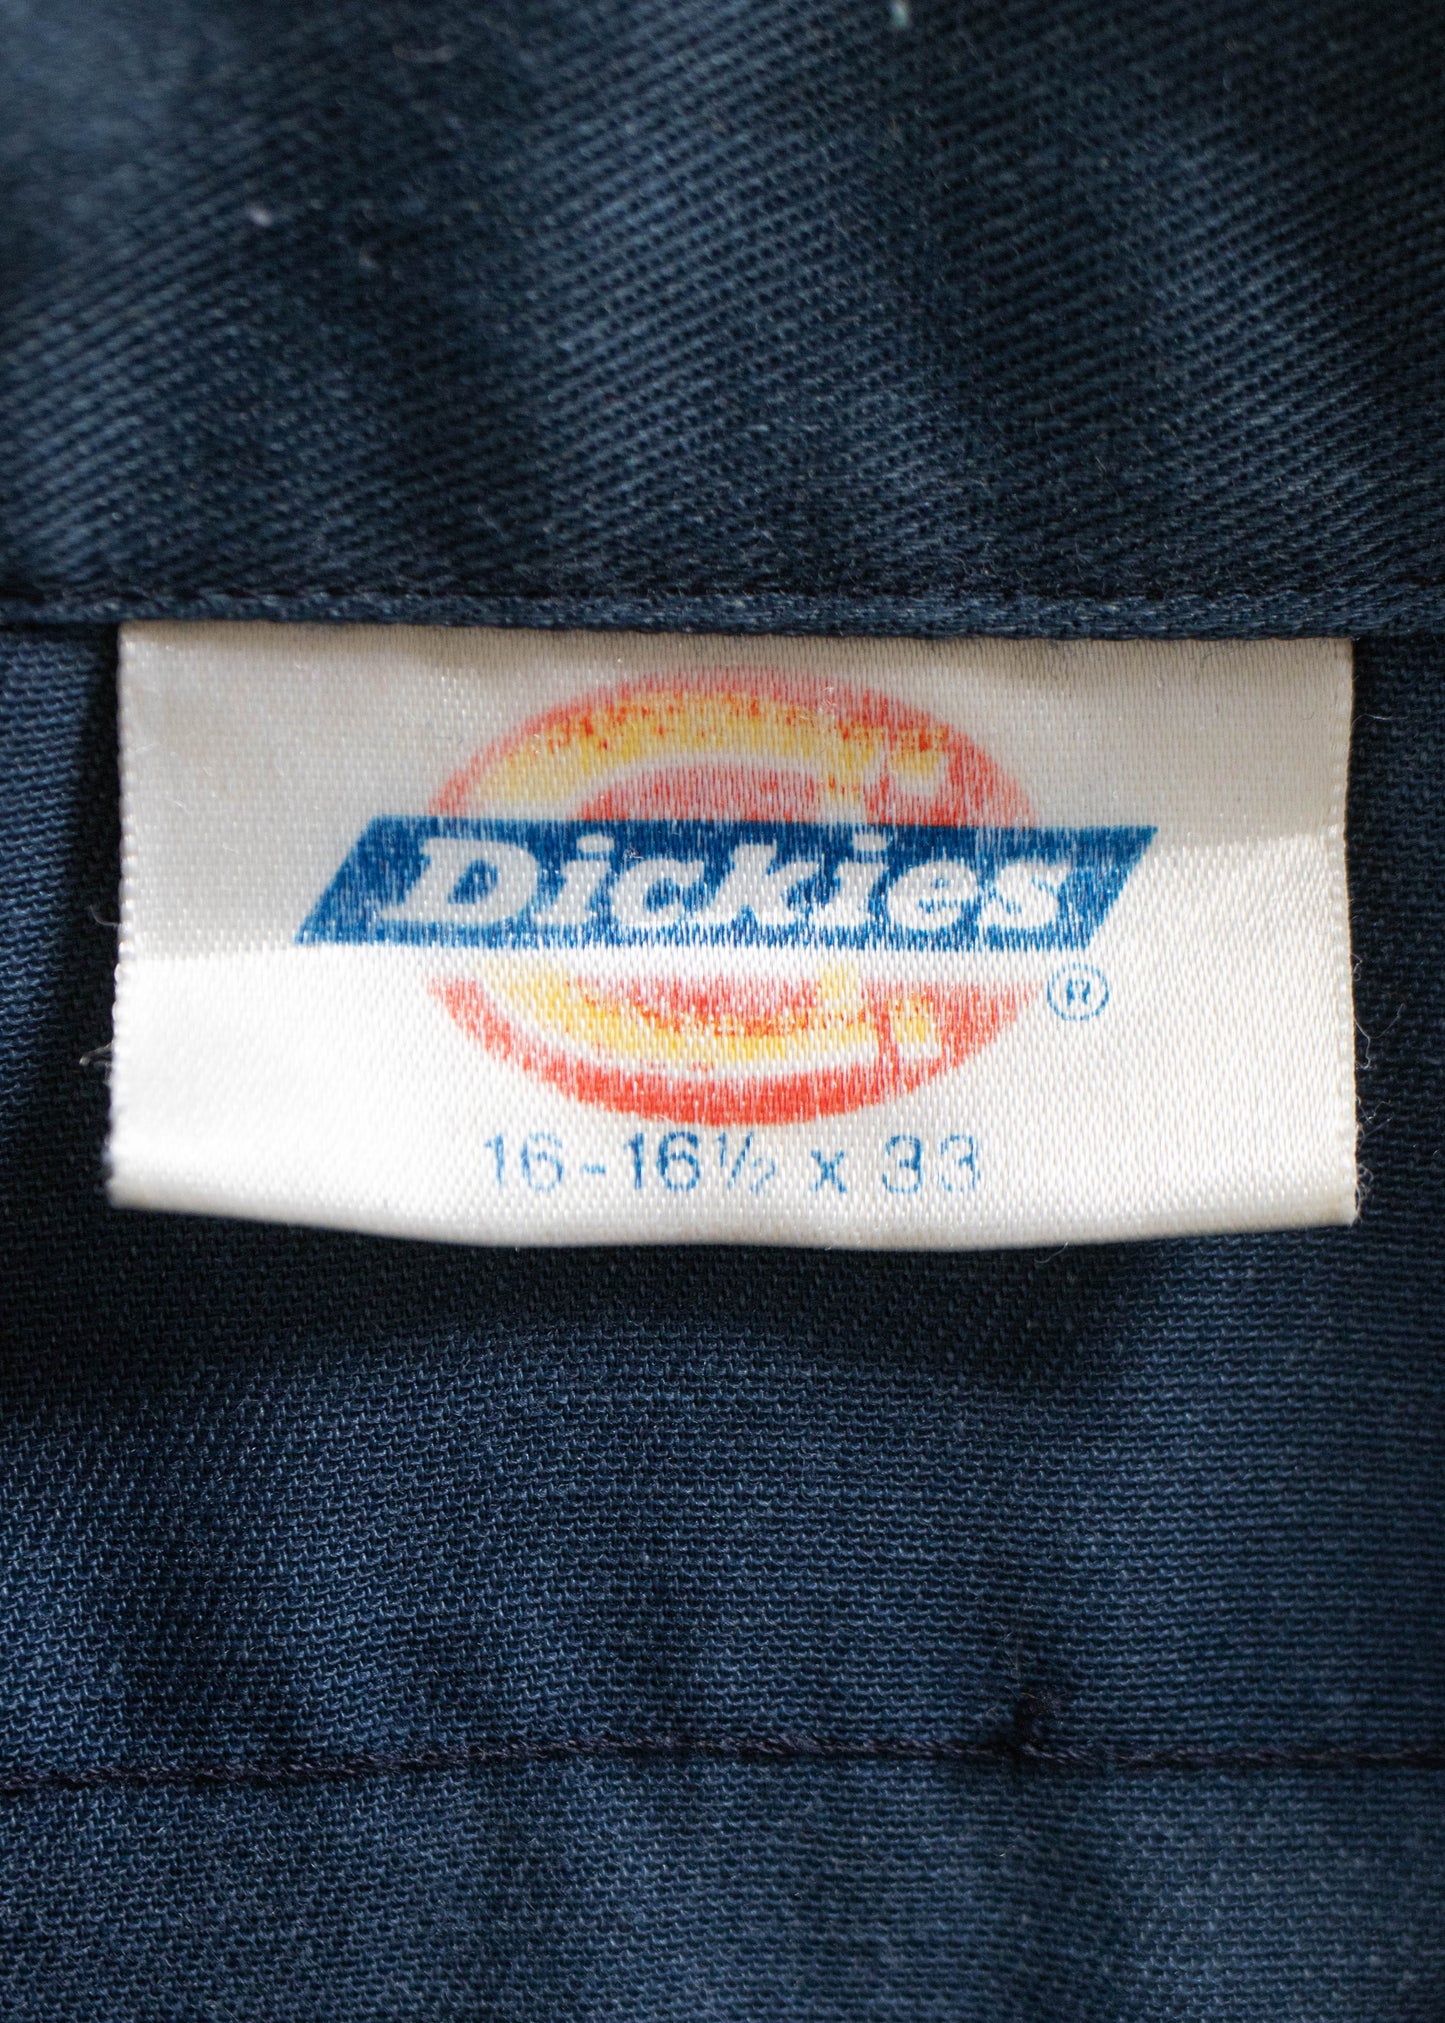 Dickies Workwear Button Up Shirt Size S/M